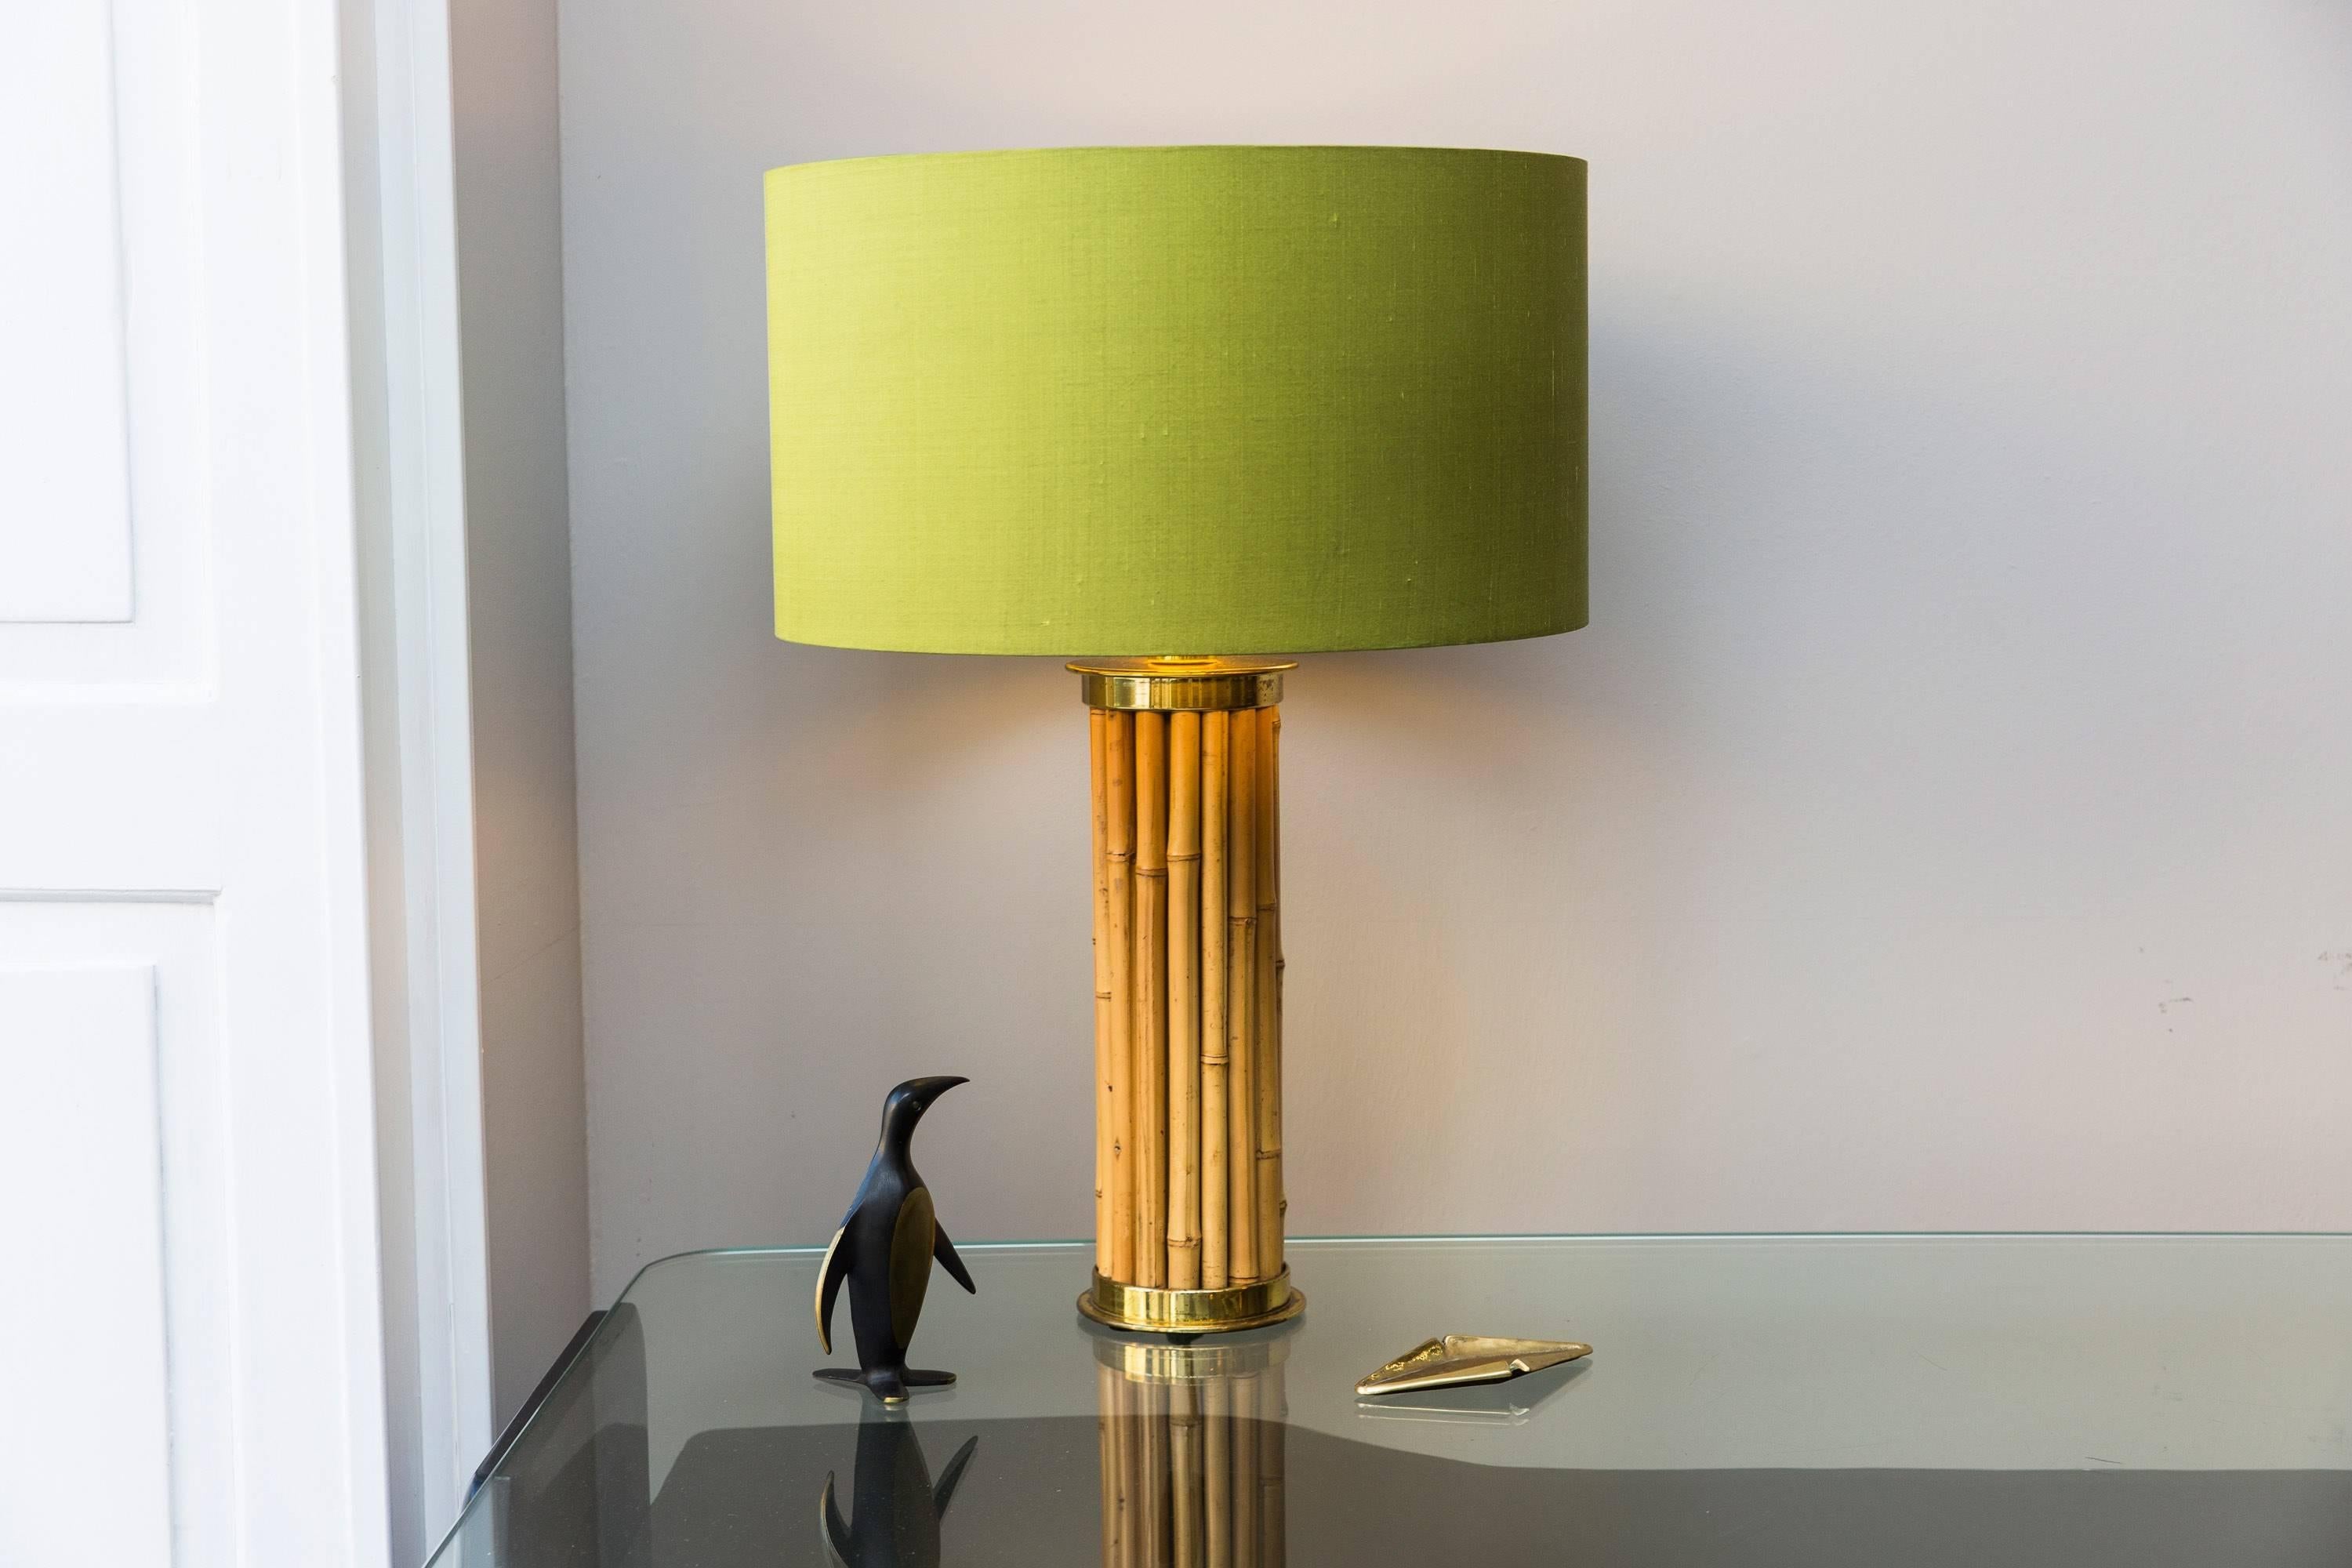 Elegant table lamp in the style to Gabriella Crespi, Italy, circa 1970, "Bamboo," Bamboo shoots, brass, new made shade in green wild silk by Zimmer&Rode. 
Measures: Height 72 cm / 28.35 inch, diameter shade 50 cm / 19.7 inch, diameter